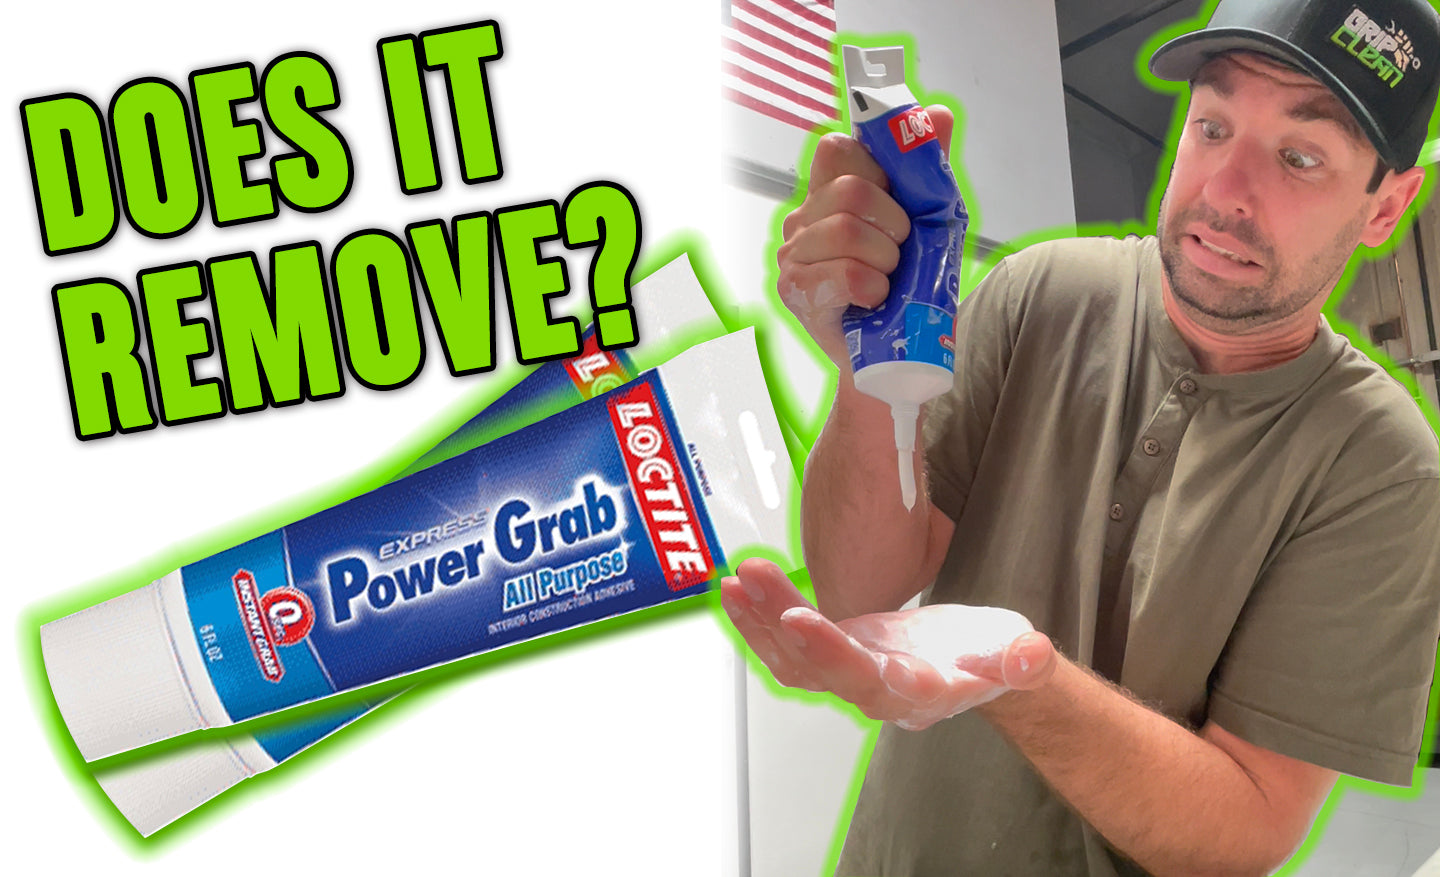 HOW TO REMOVE: Loctite Power Grab